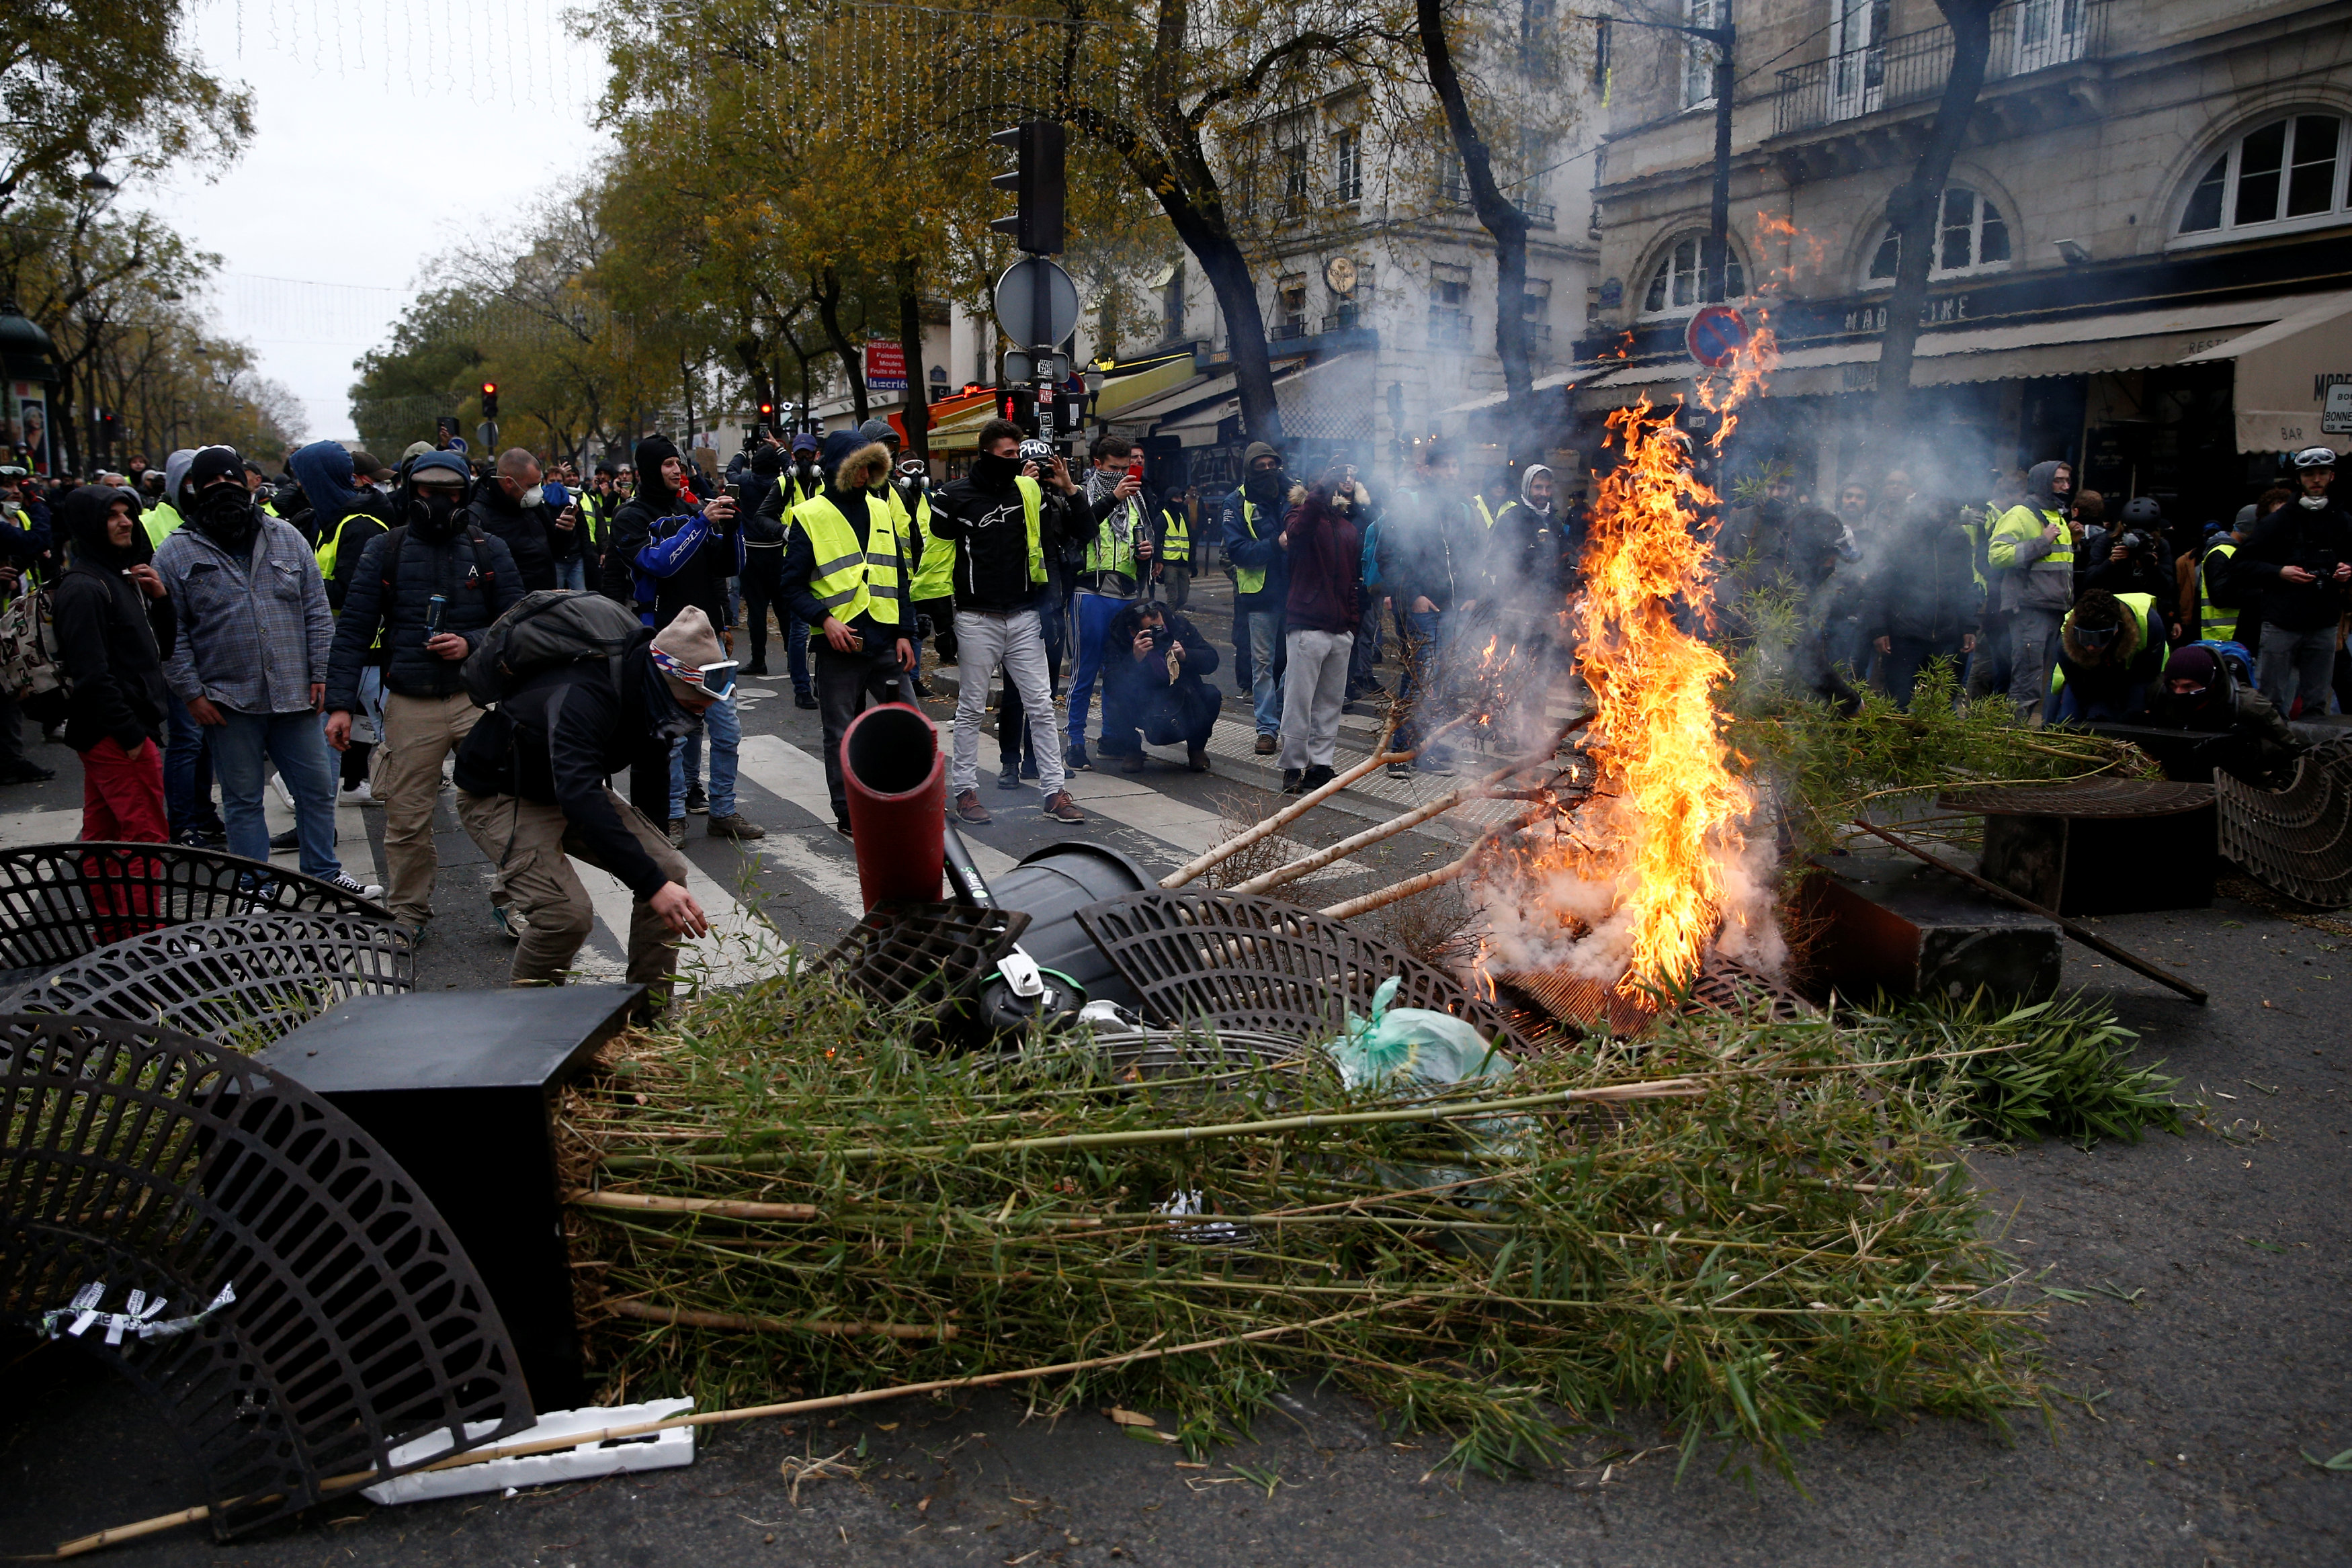 2018-12-08T122747Z_362778682_RC1833F36CF0_RTRMADP_3_FRANCE-PROTESTS